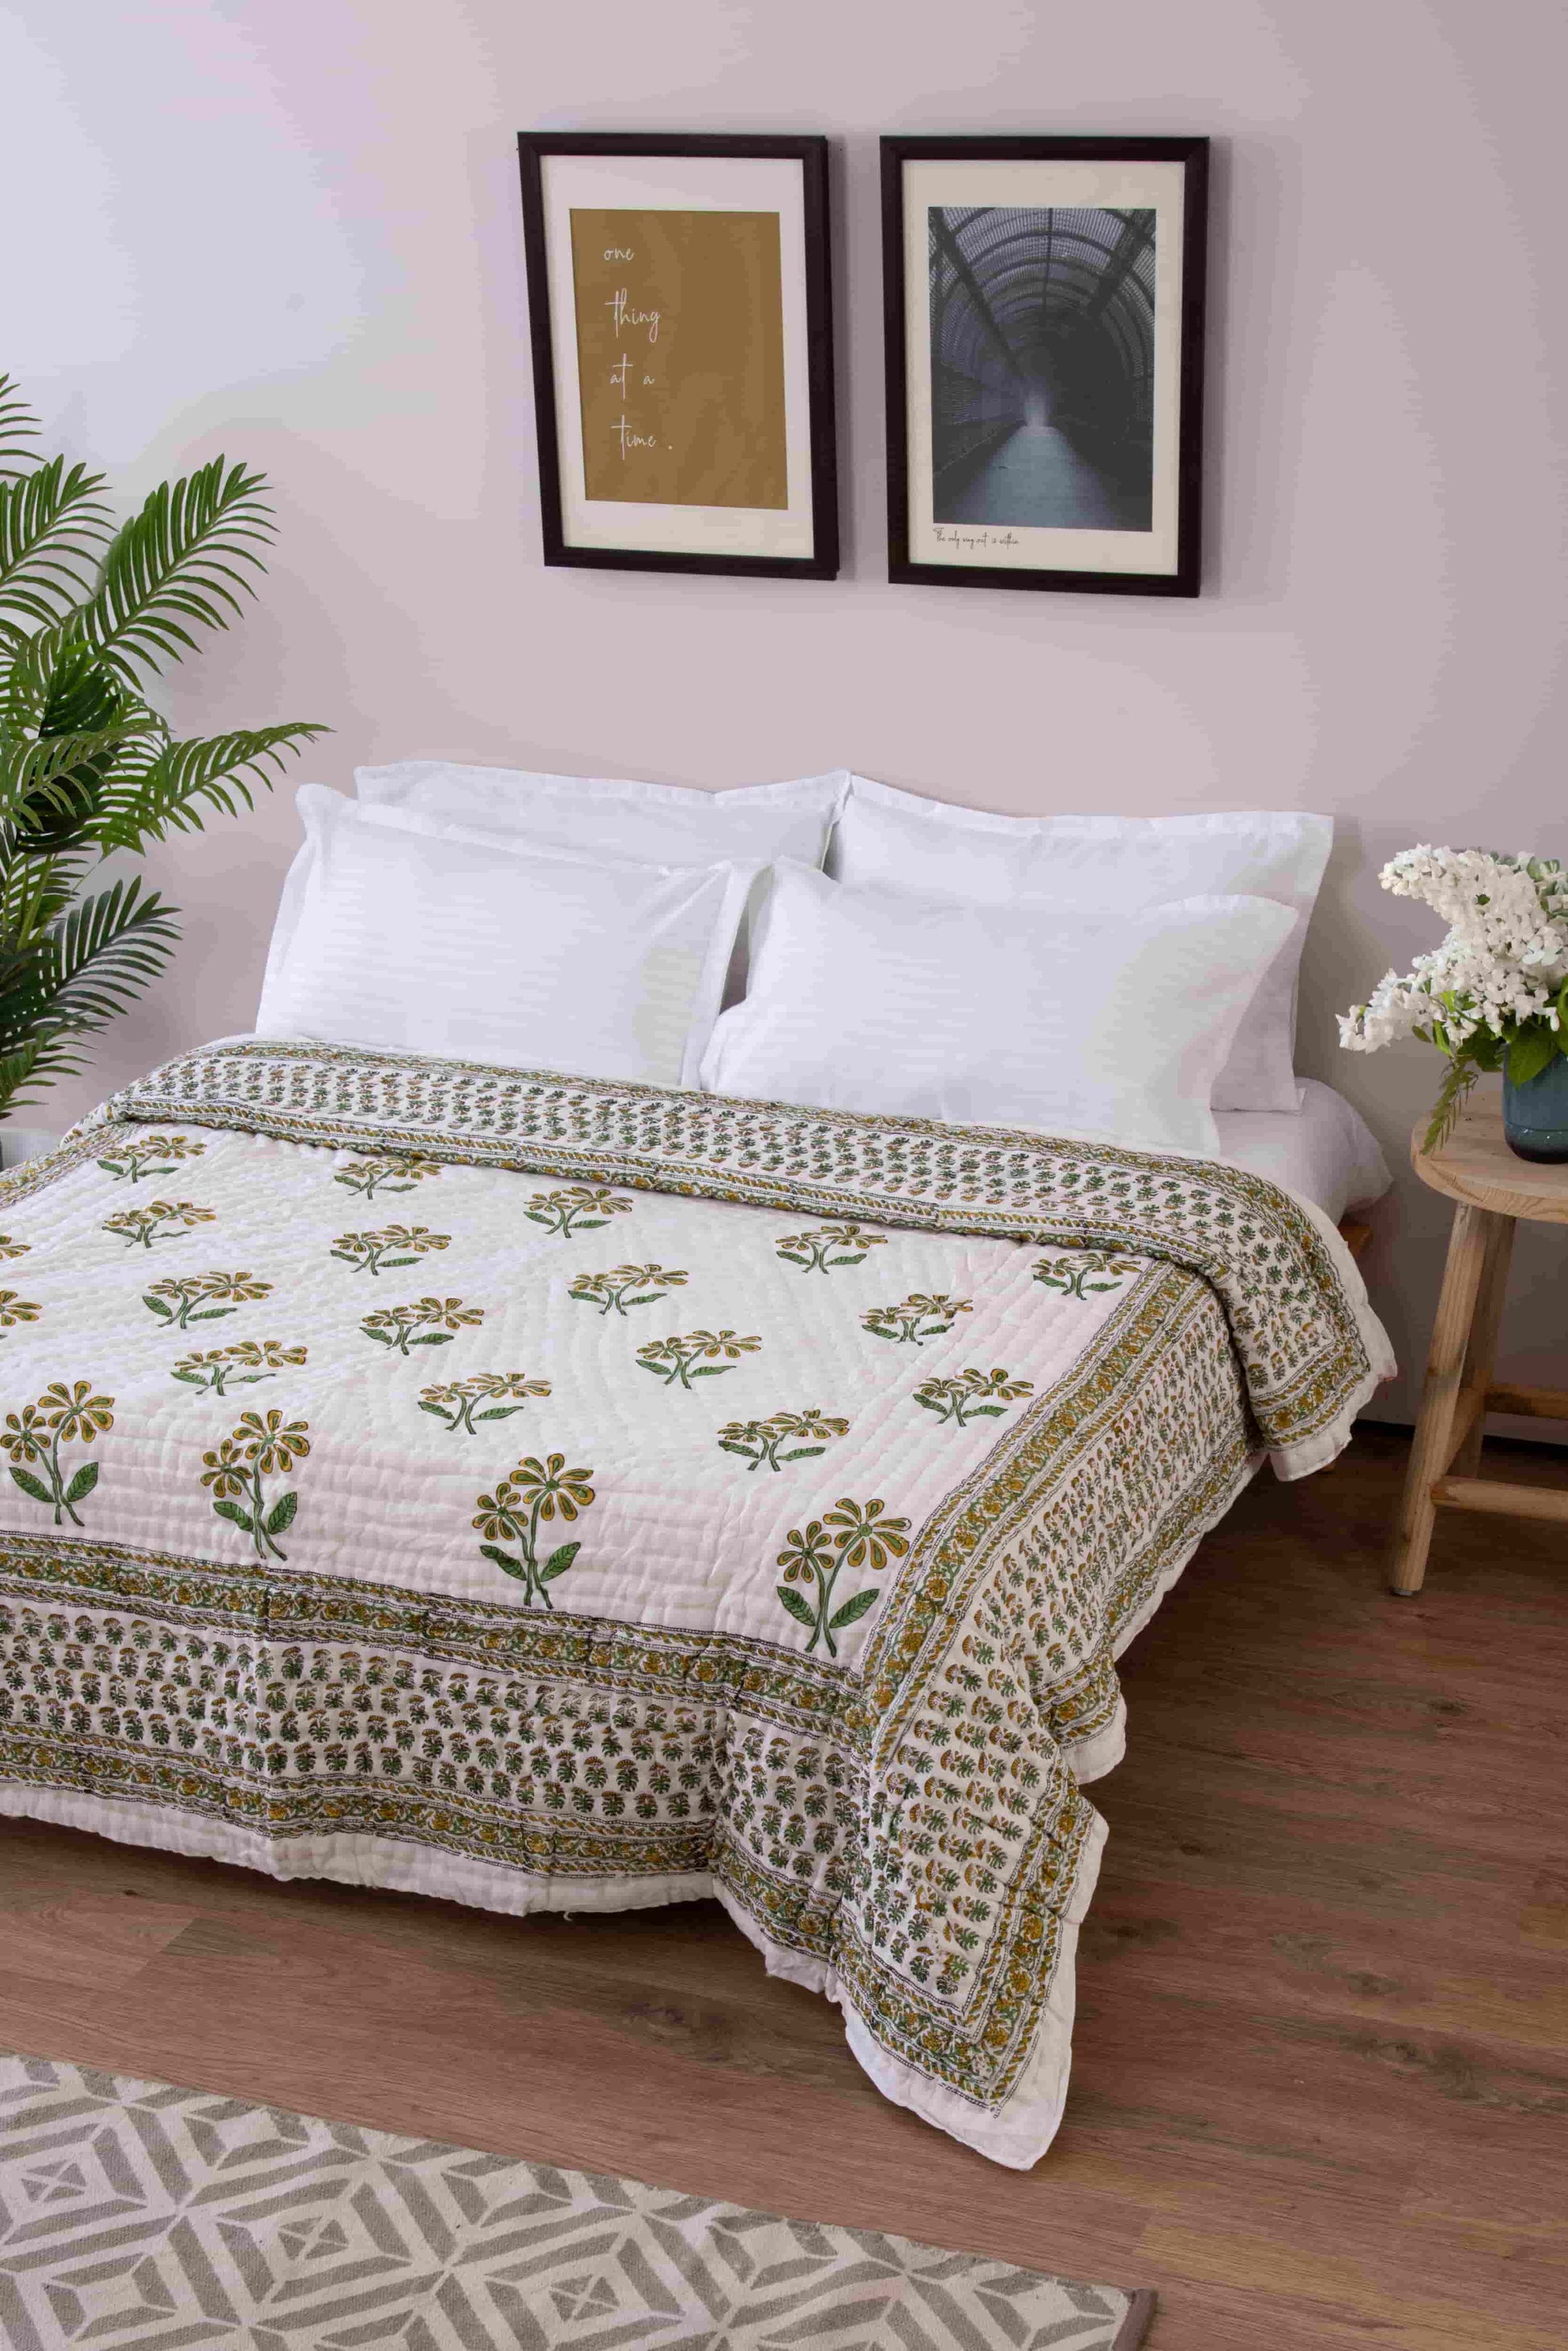 Traditional block printed jaipuri quilt razai, handmade by the local artisans. comes in double and single bed for winters and ac use